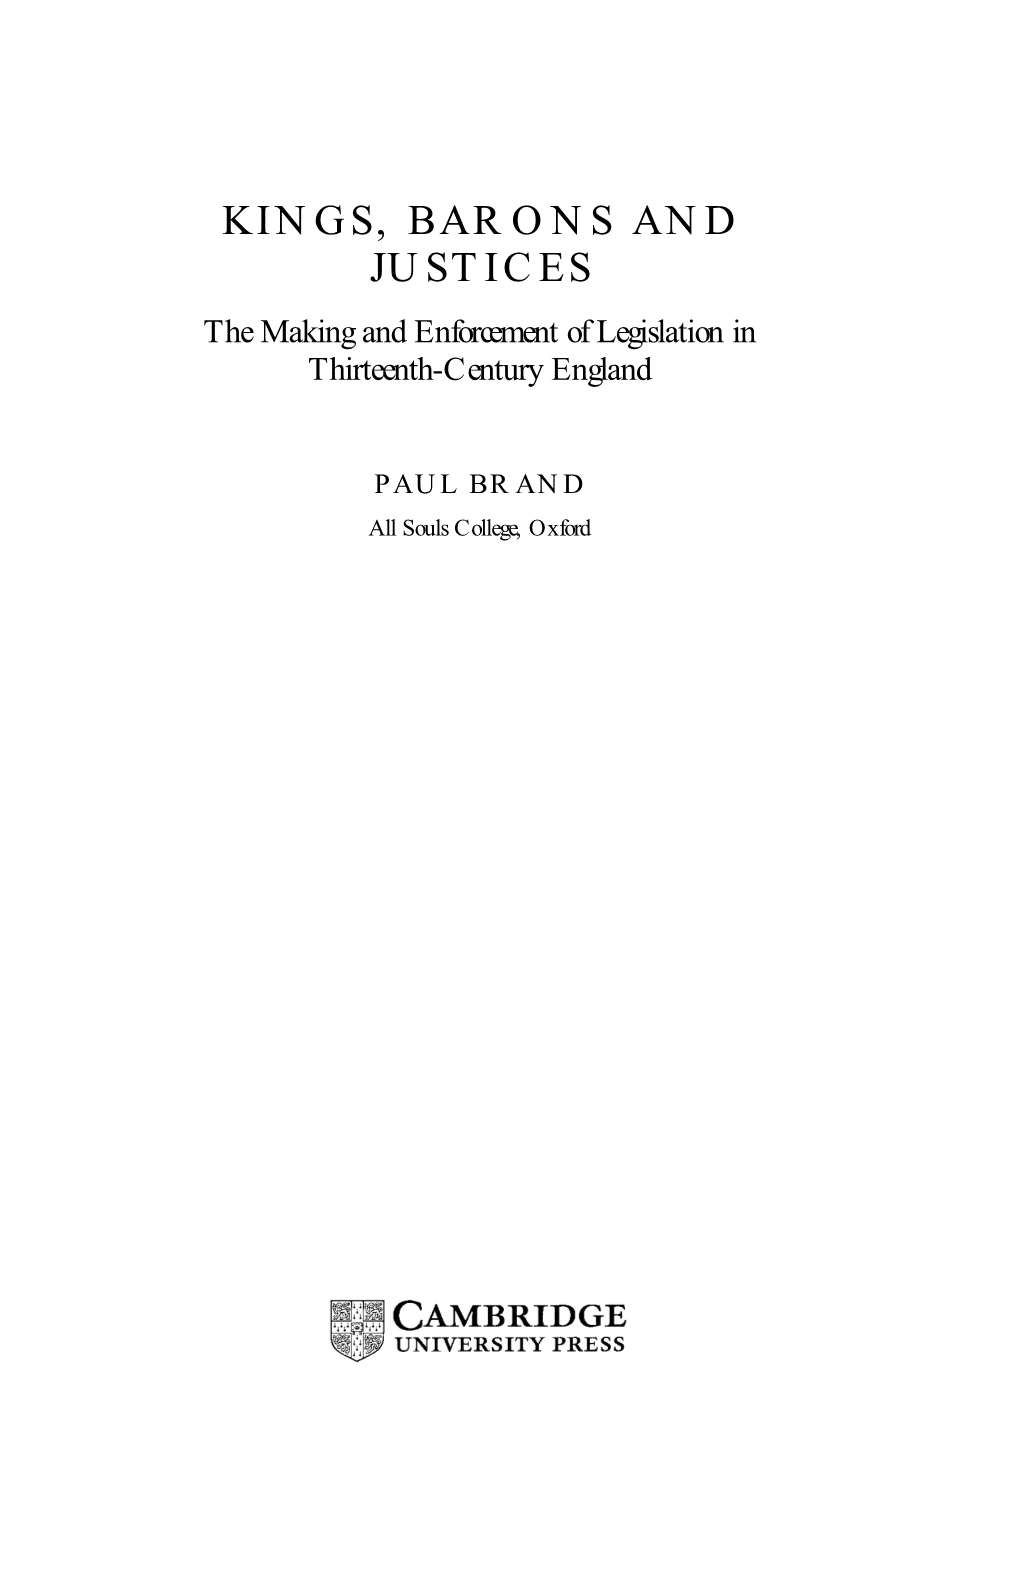 KINGS, BARONS and JUSTICES the Making and Enforcement of Legislation in Thirteenth-Century England